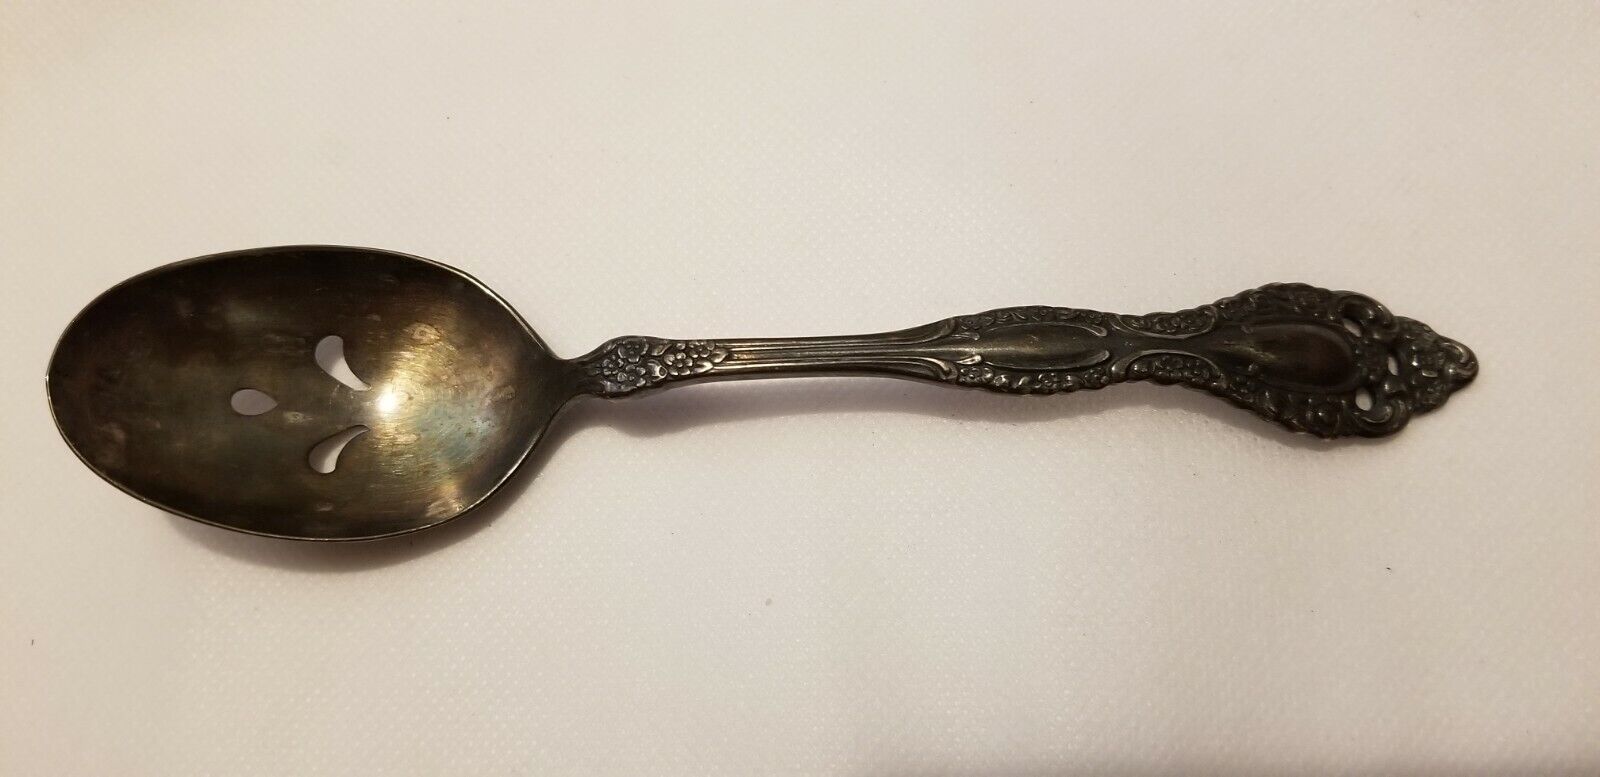  ANTIQUE VINTAGE COLLECTIBLE SPOON 6.75" 1881 ROGERS SILVER PLATE 